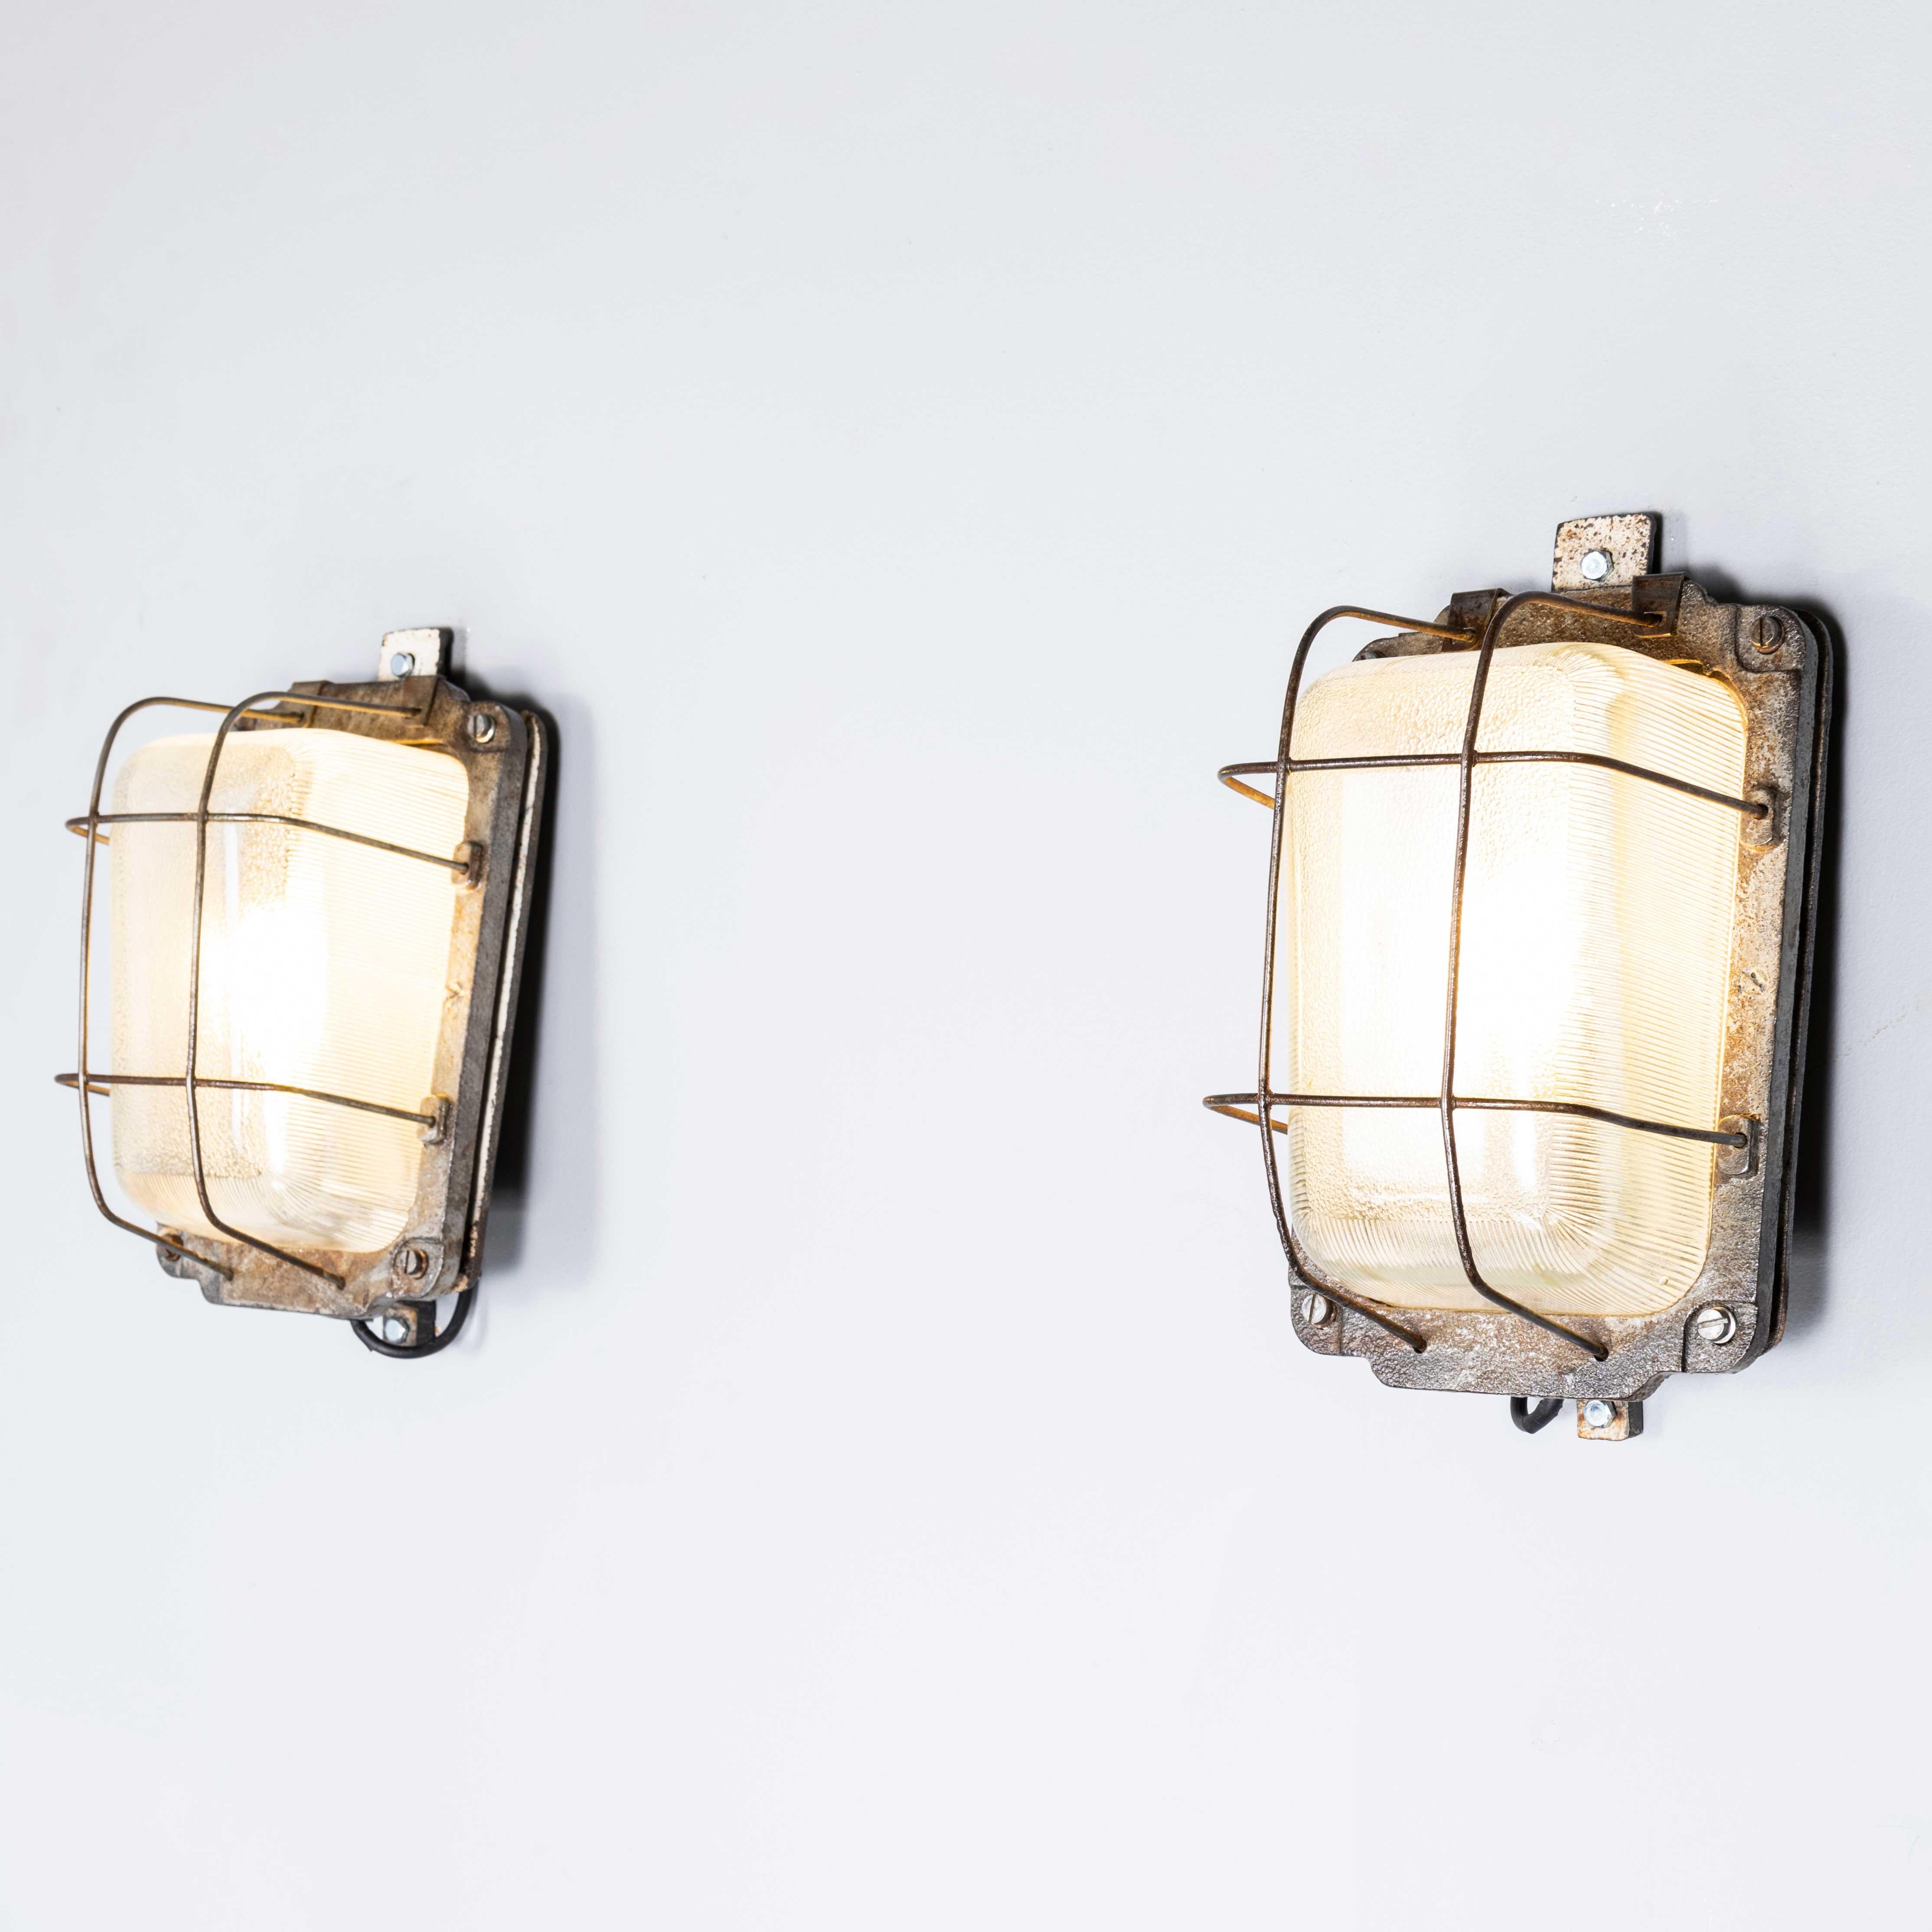 1950’s Industrial Steel Bulkhead Lamps – Pair.
1950’s Industrial Steel Bulkhead Lamps – Pair. Each lamp has been cleaned and restored and all electrical components have been removed and replaced with modern European CE standard components to BS EN